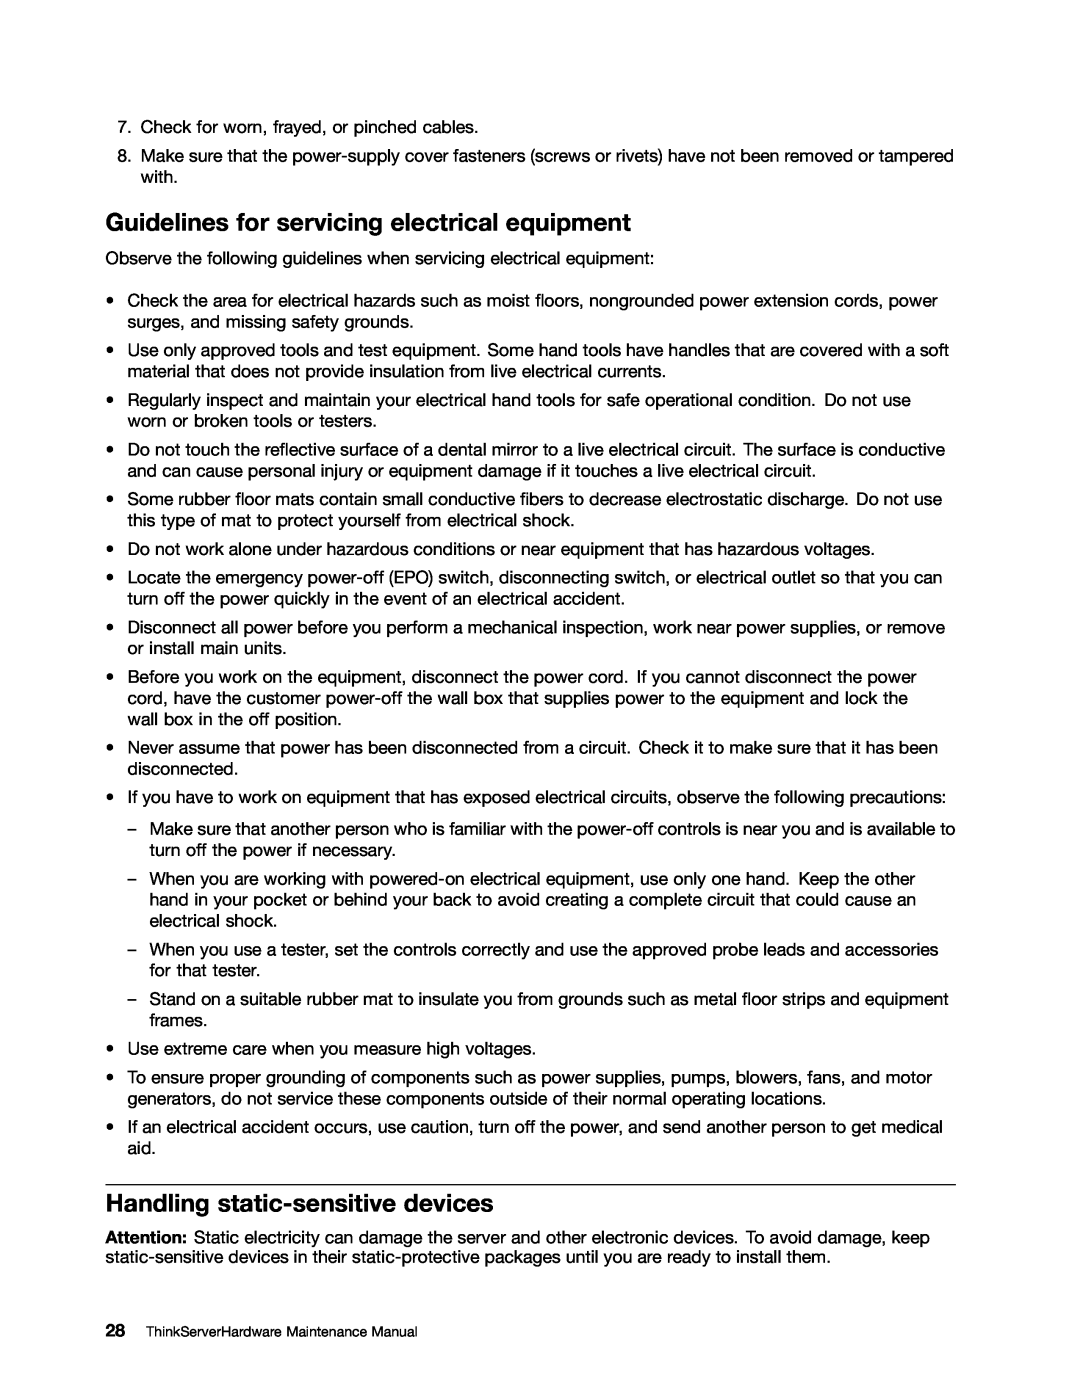 Lenovo 1008, 992, 981, 1010 manual Guidelines for servicing electrical equipment, Handling static-sensitive devices 